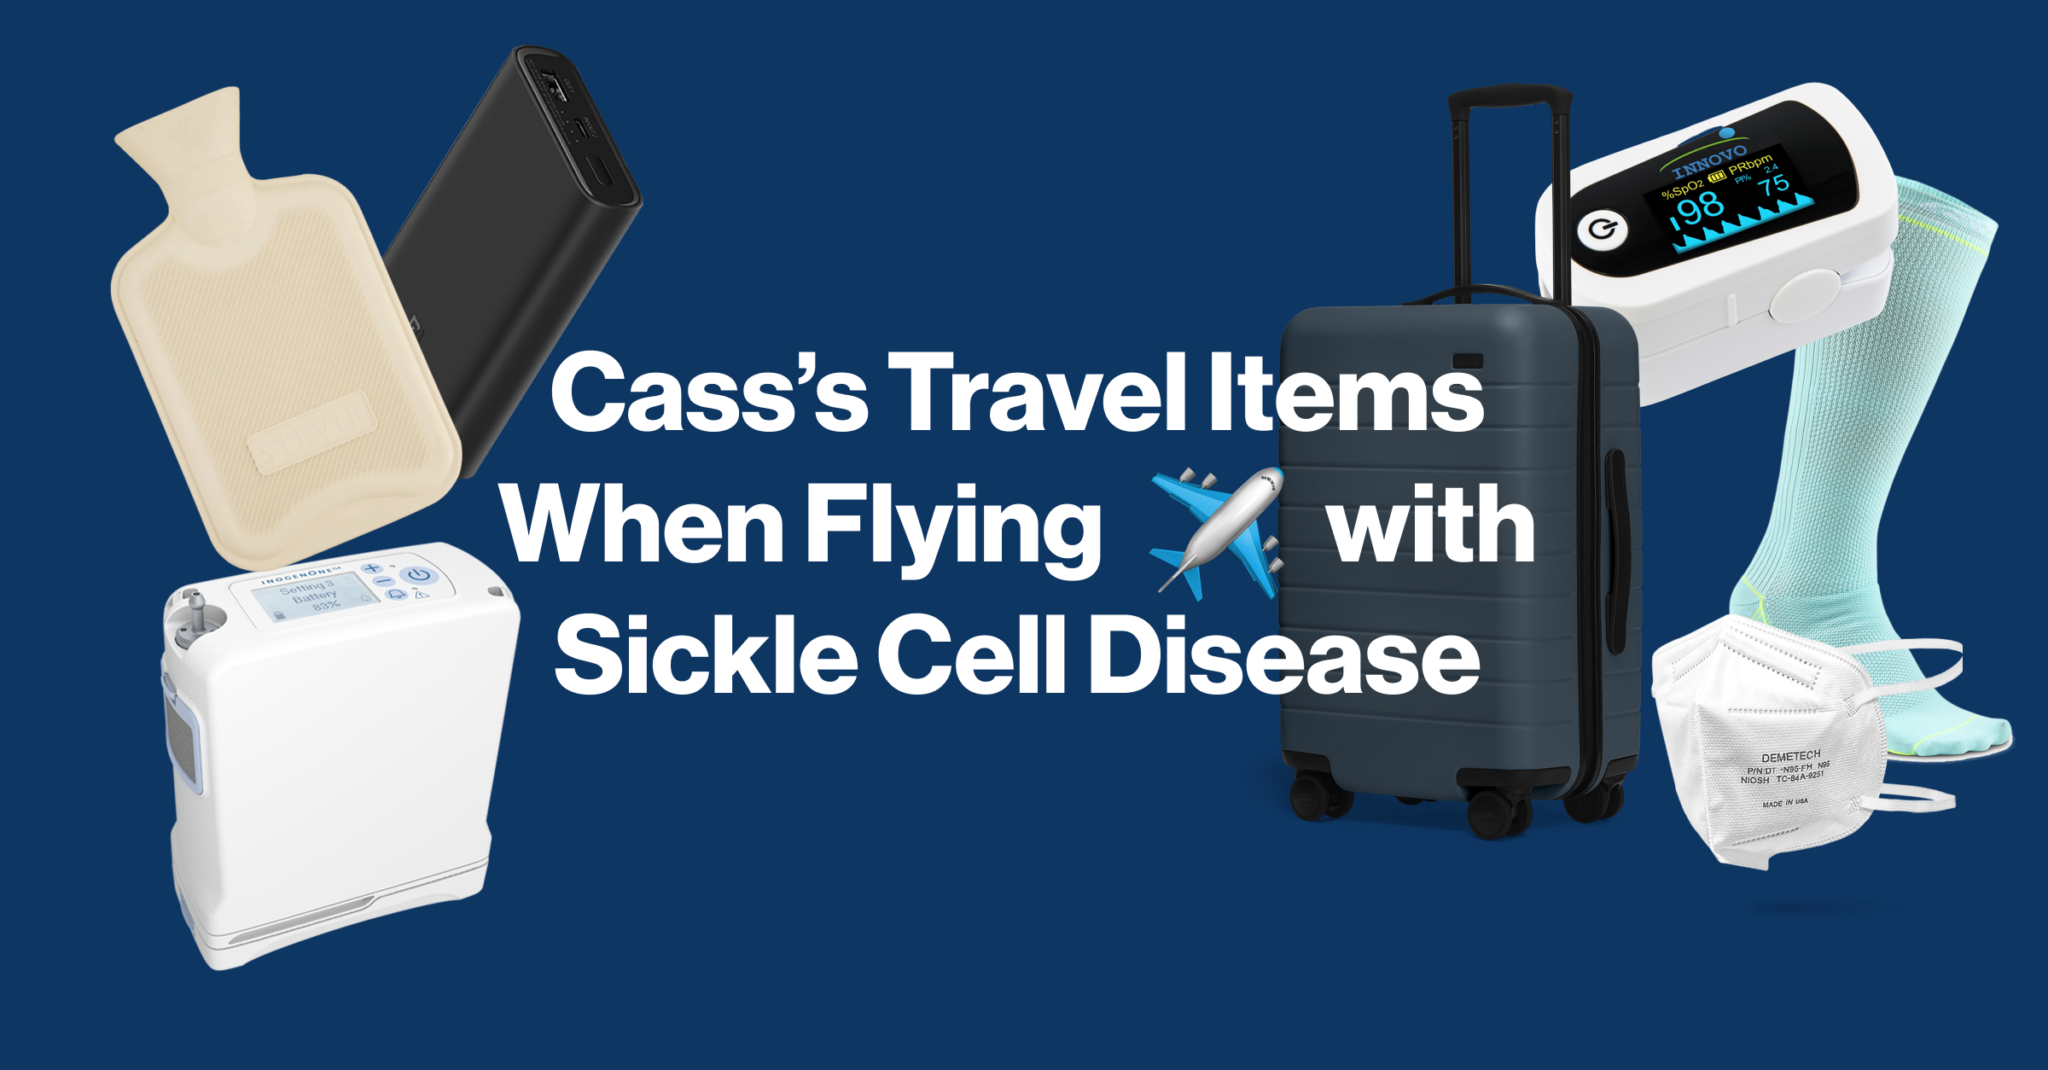 Cass’s Travel Items When Flying with Sickle Cell Disease